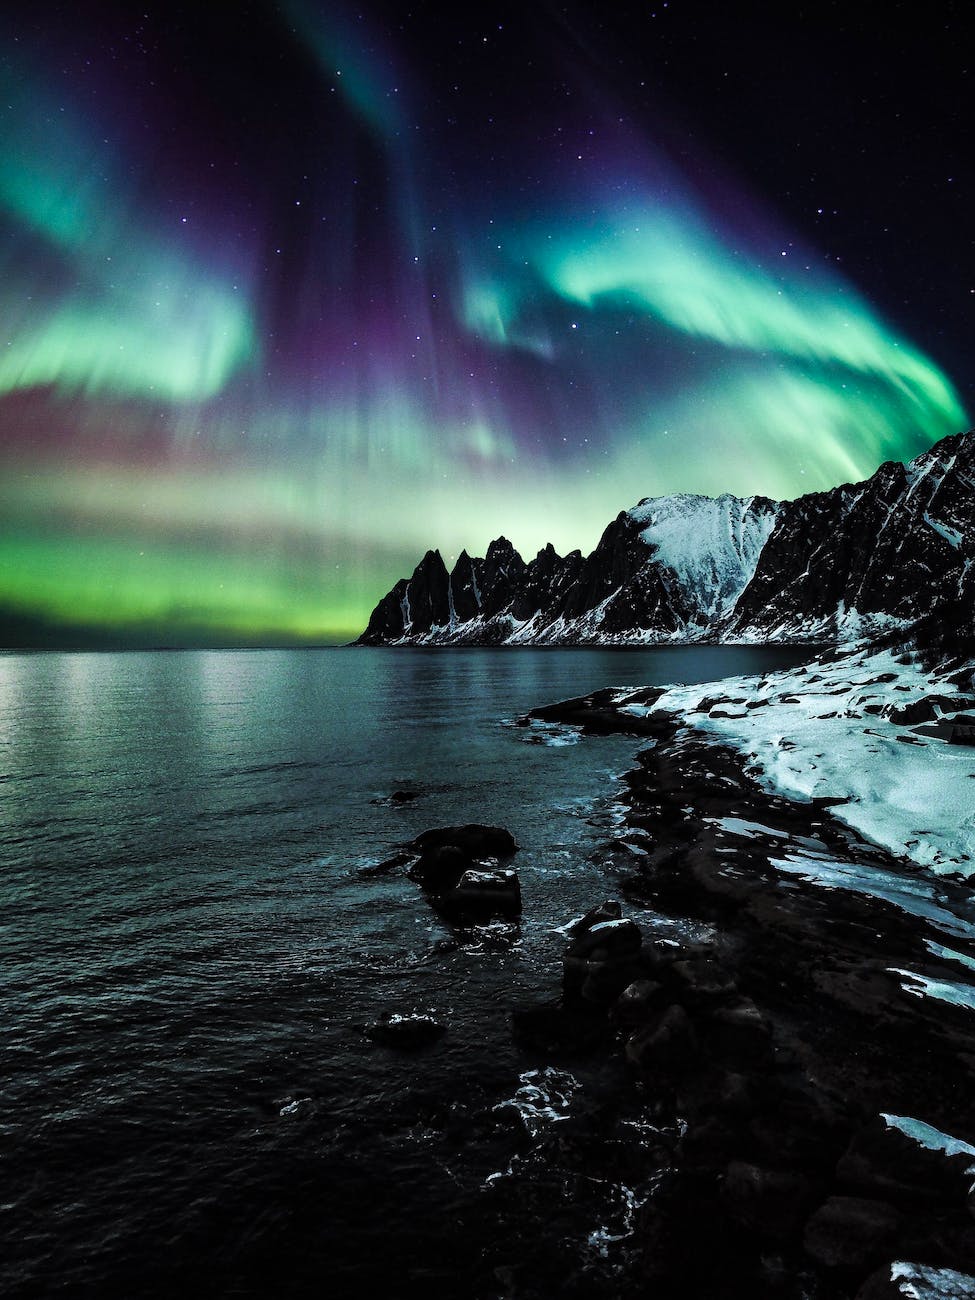 Why should you travel to Norway to see the Northern Lights?